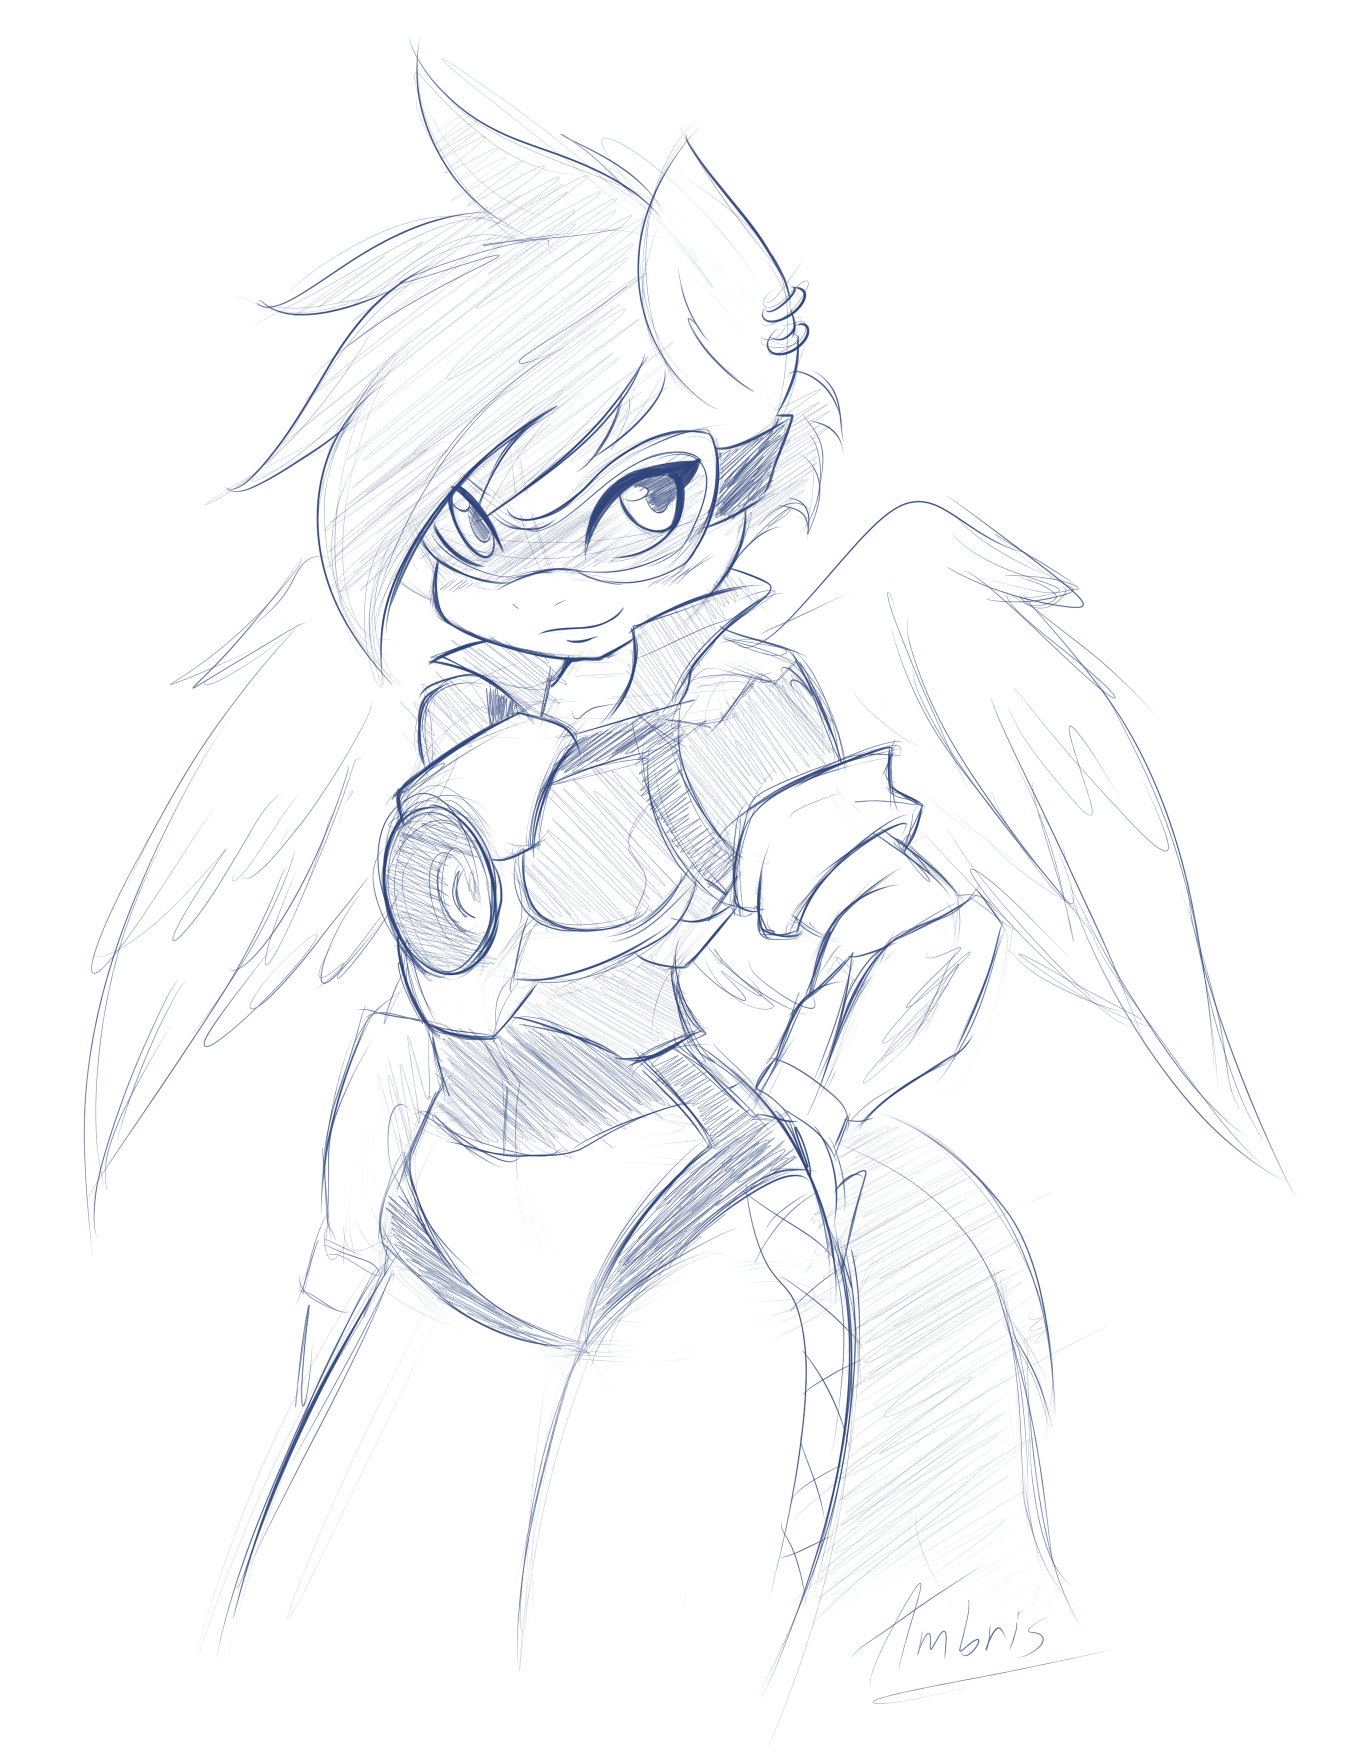 https://derpicdn.net/img/view/2015/1/16/807961__safe_rainbow+dash_anthro_monochrome_crossover_goggles_artist-colon-ambris_overwatch_tracer.png